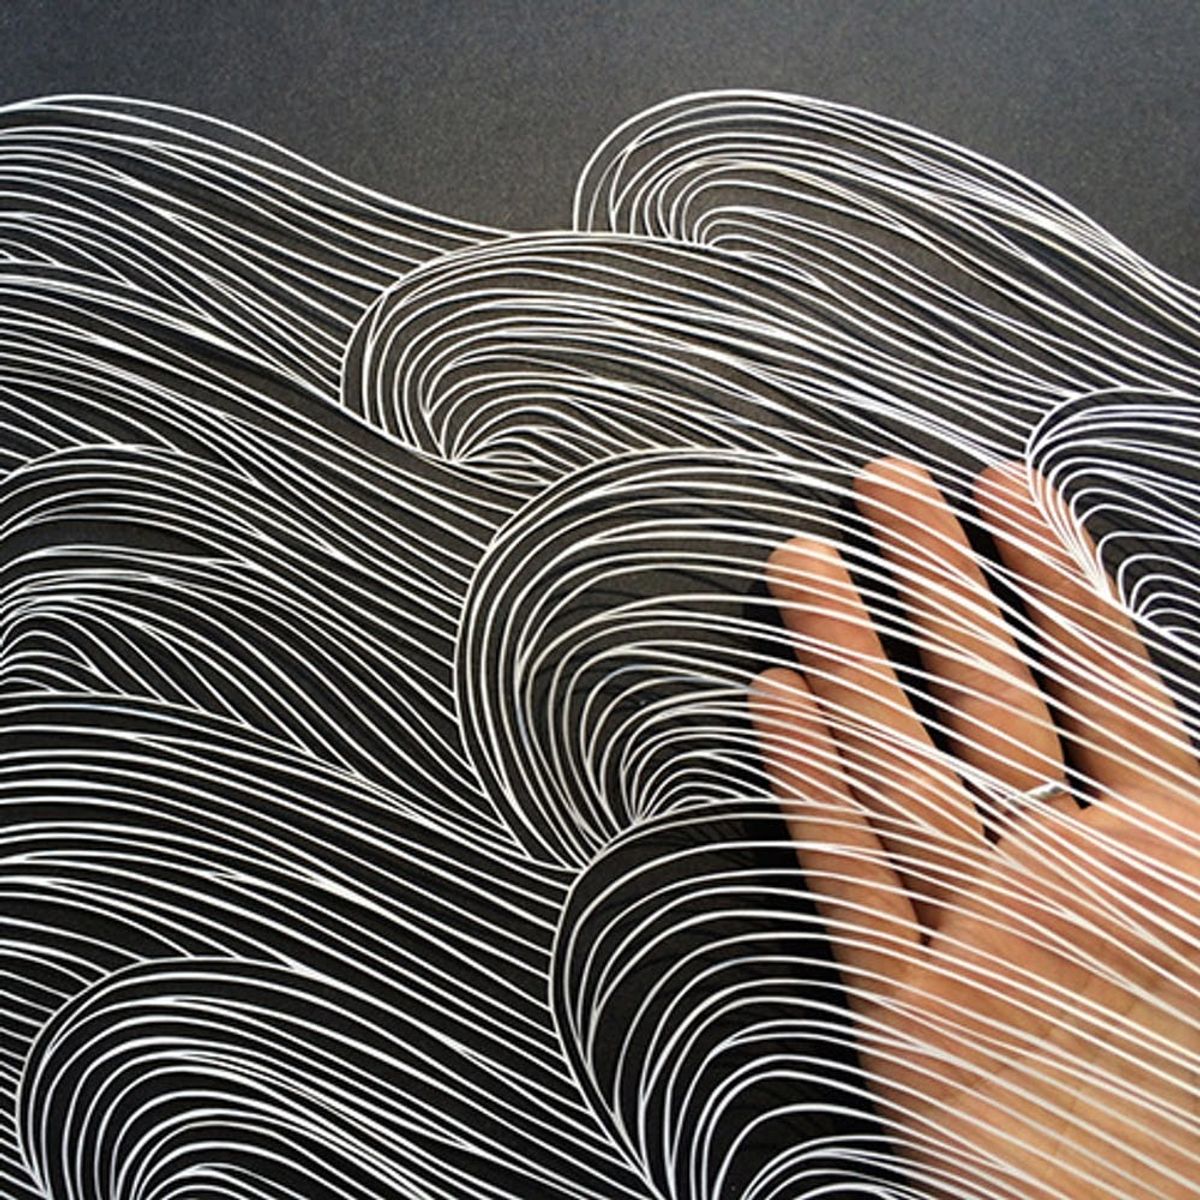 These Beautiful Paper Pics Have Us Reeling